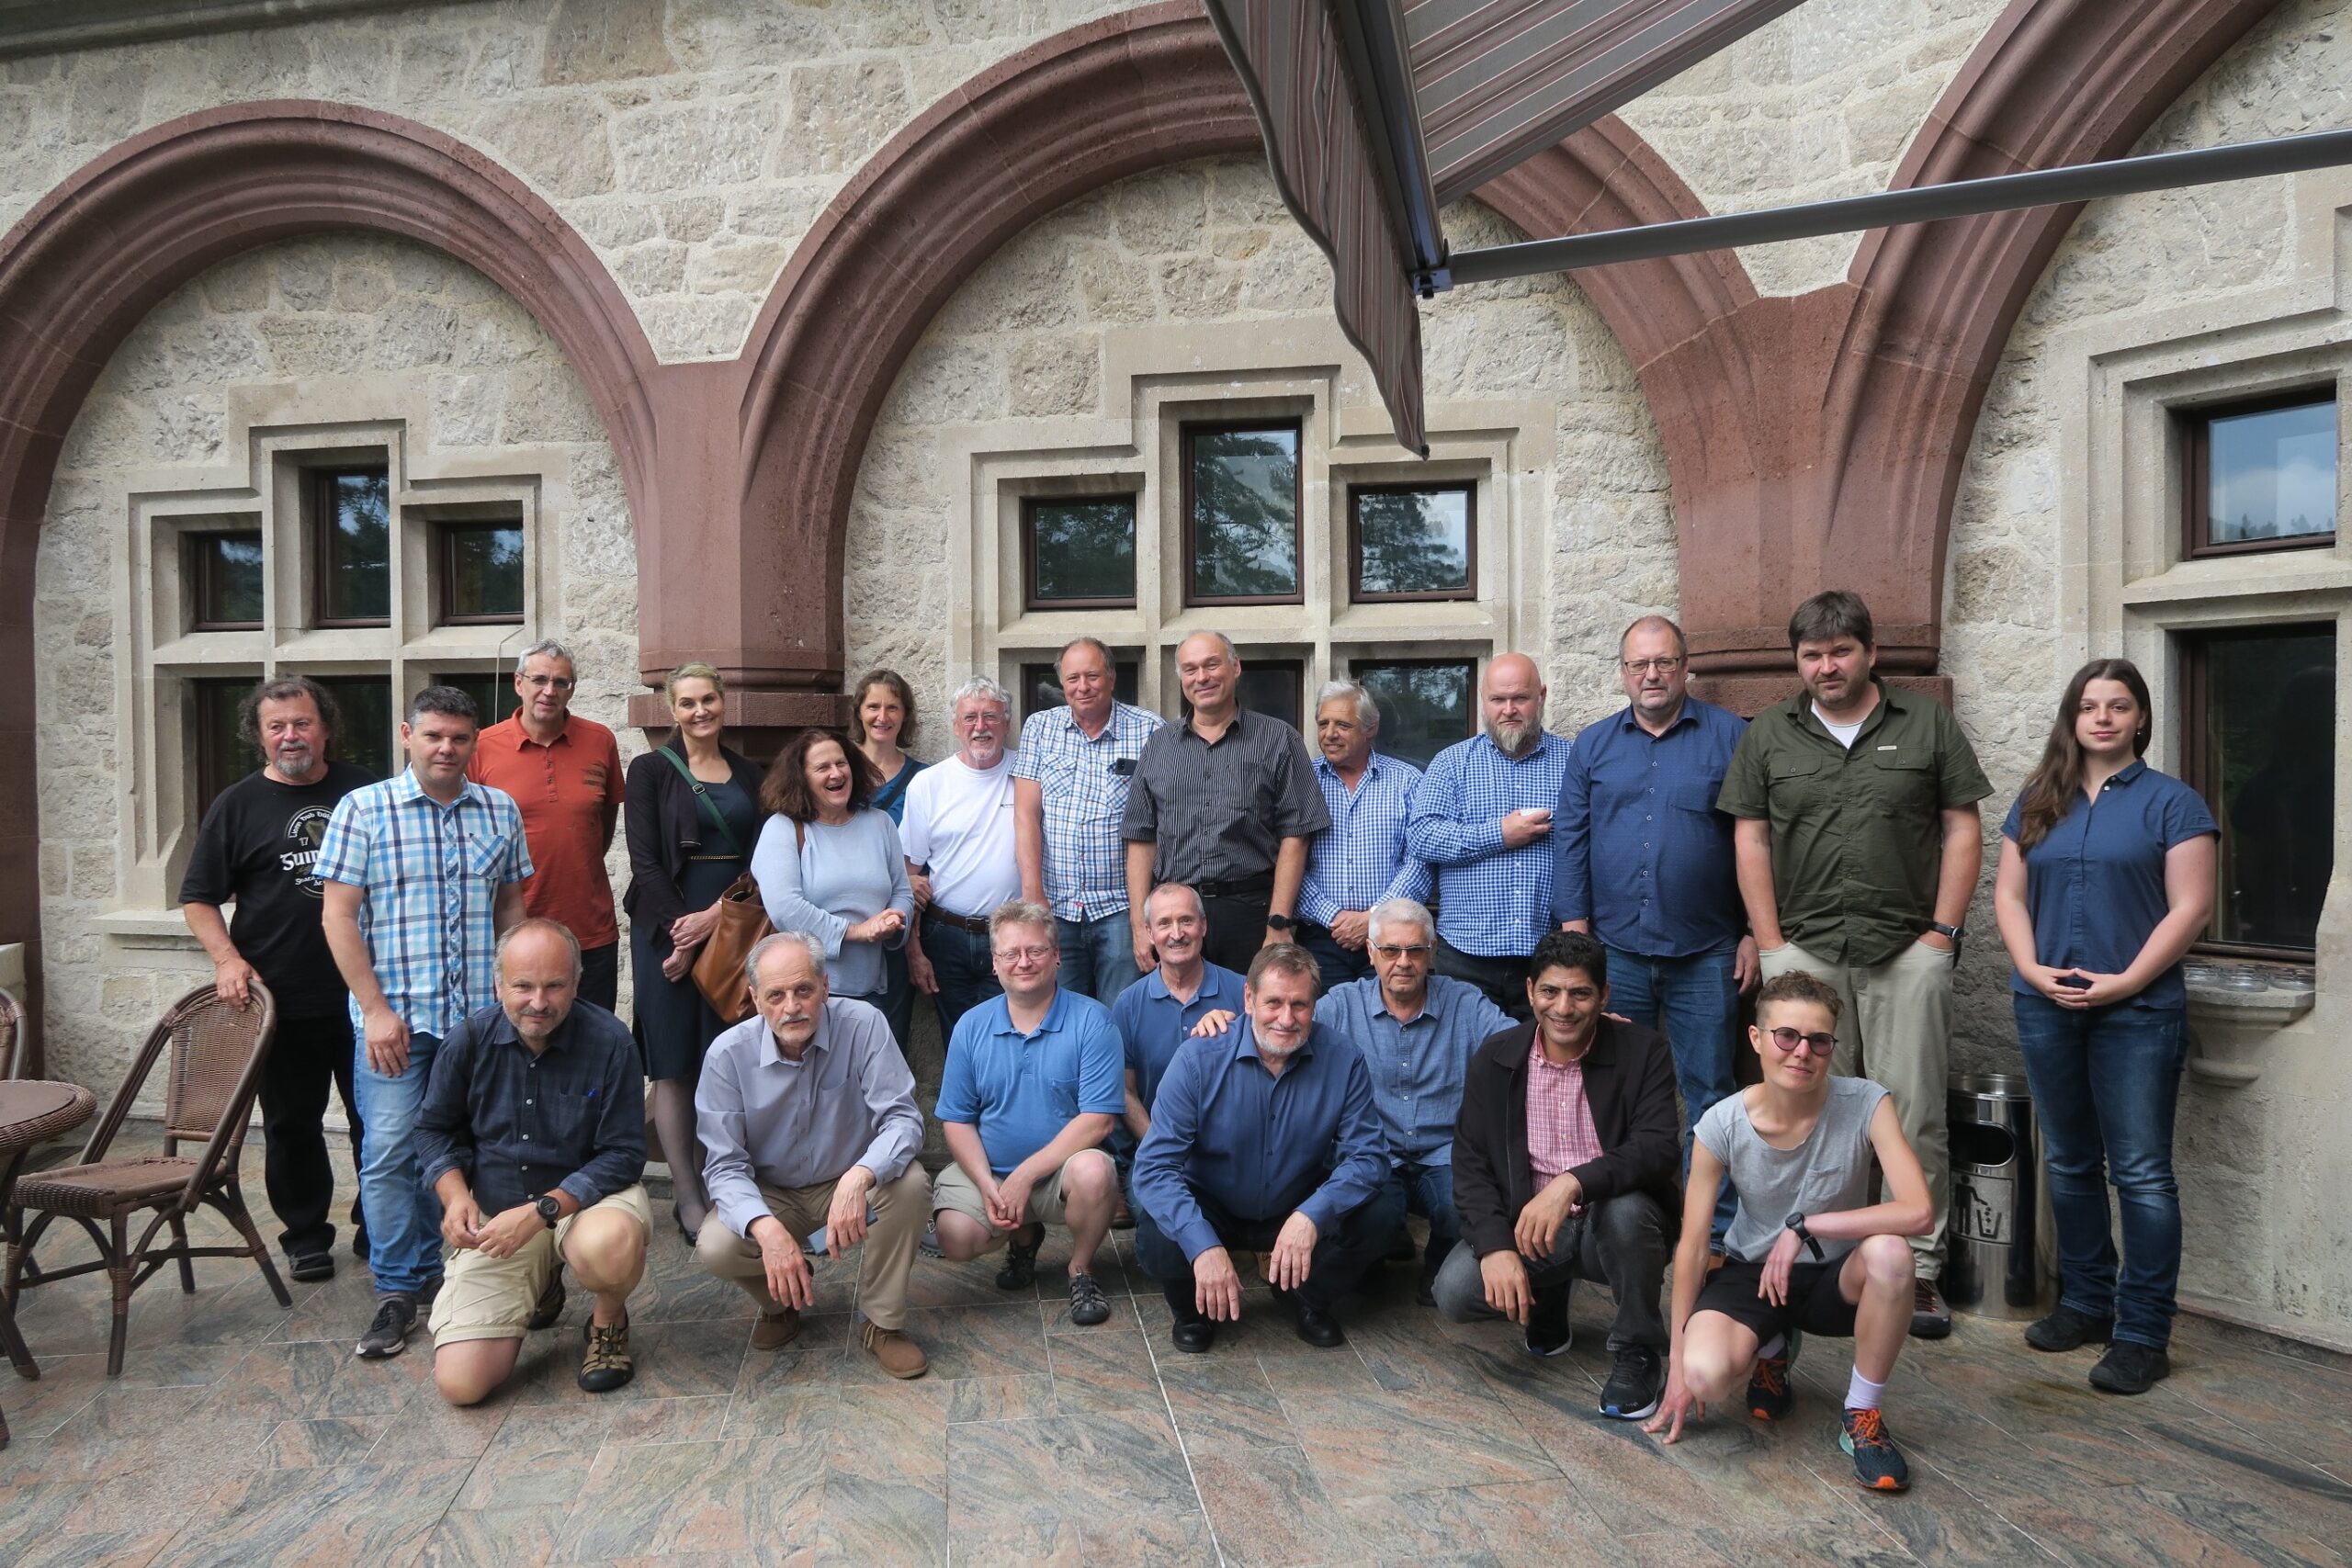 5th Bohemian Massif symposium – participants at Congress Center of the Slovak Academy of Sciences (Smolenice castle)